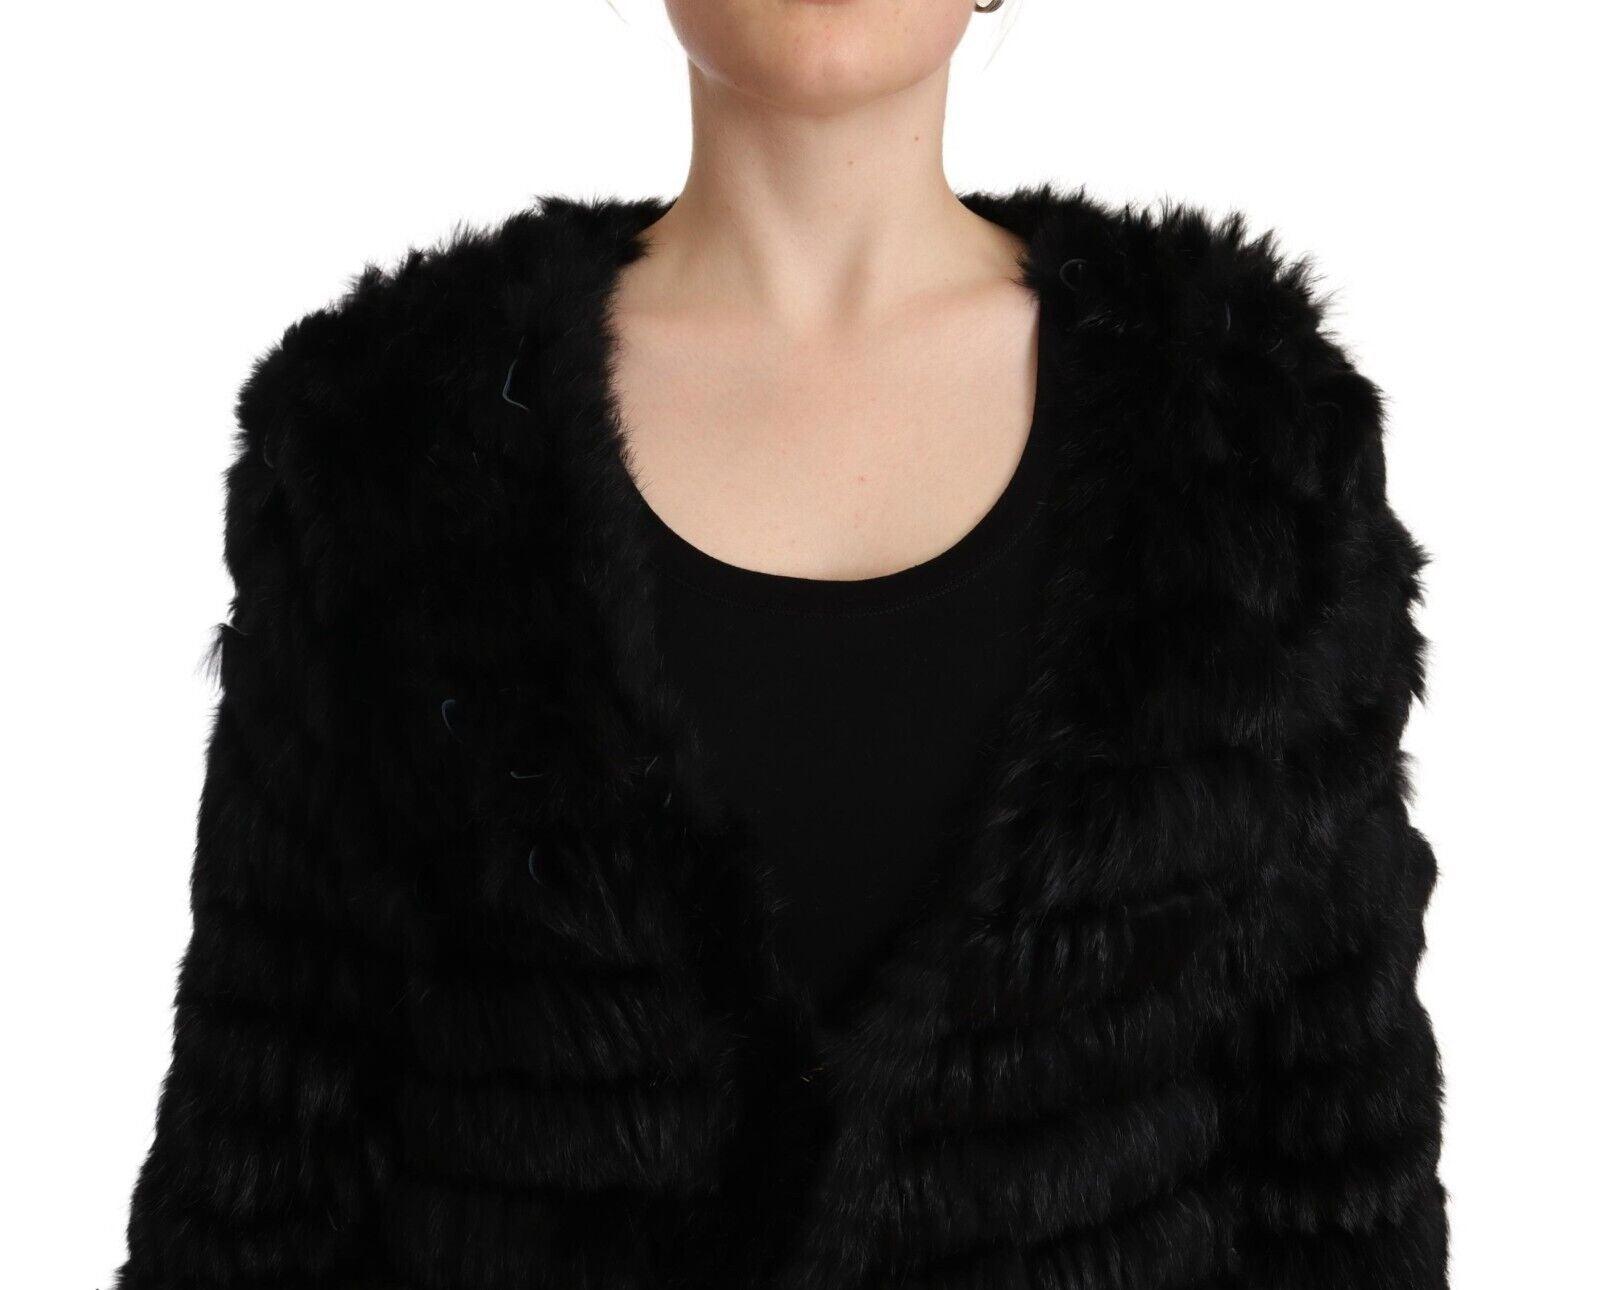 Just Cavalli Women's Black Rabbit Fur Cardigan Long Sleeves Jacket - Designed by Just Cavalli Available to Buy at a Discounted Price on Moon Behind The Hill Online Designer Discount Store